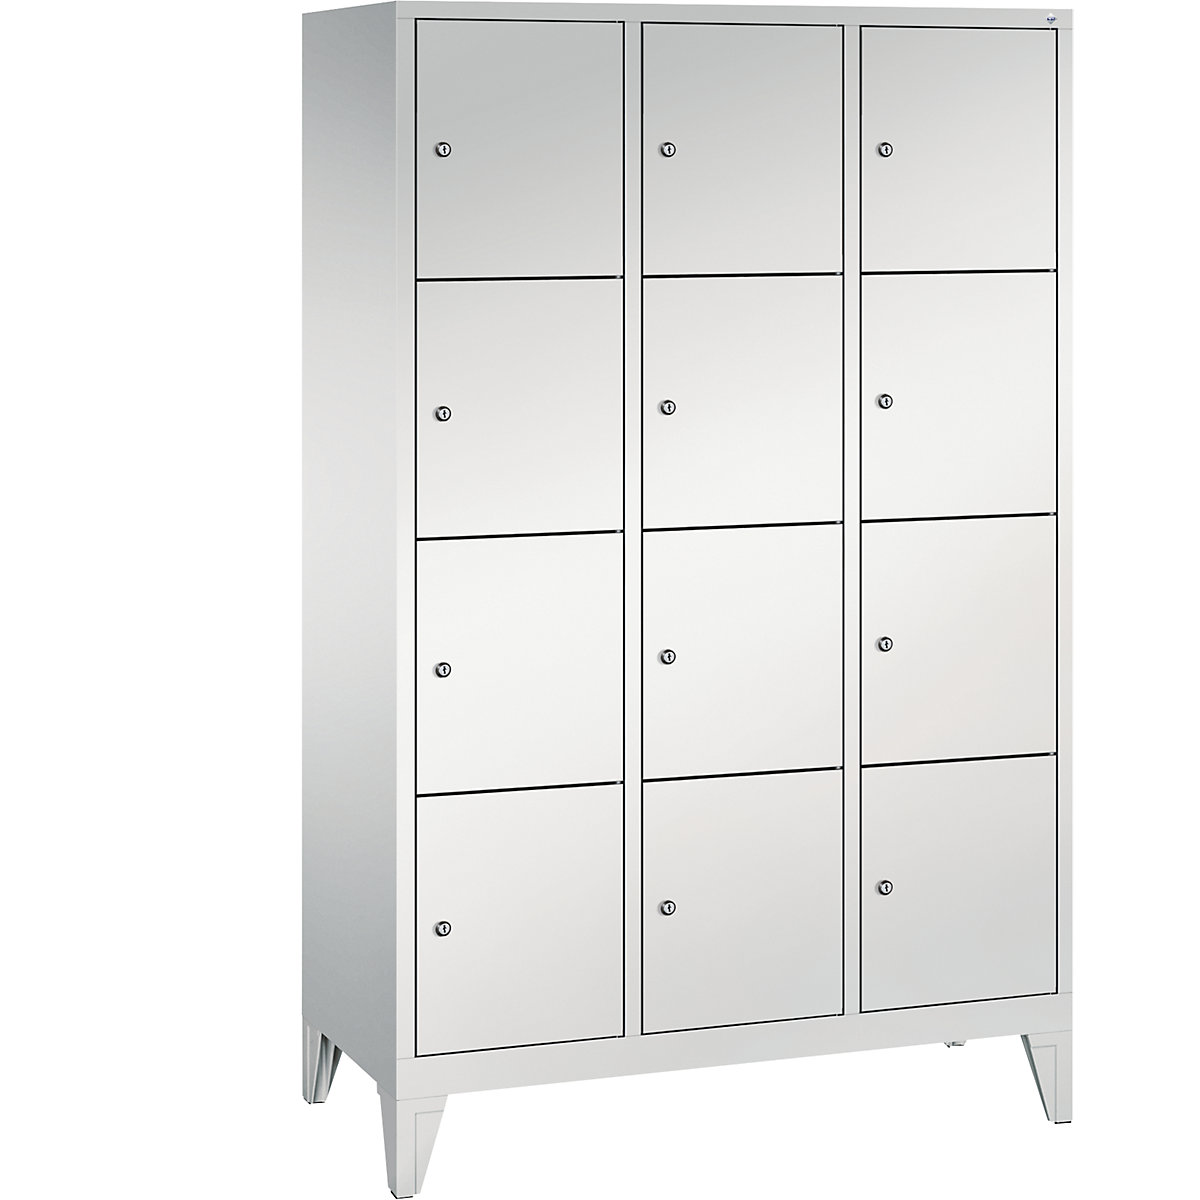 CLASSIC locker unit with feet – C+P, 3 compartments, 4 shelf compartments each, compartment width 400 mm, light grey-7